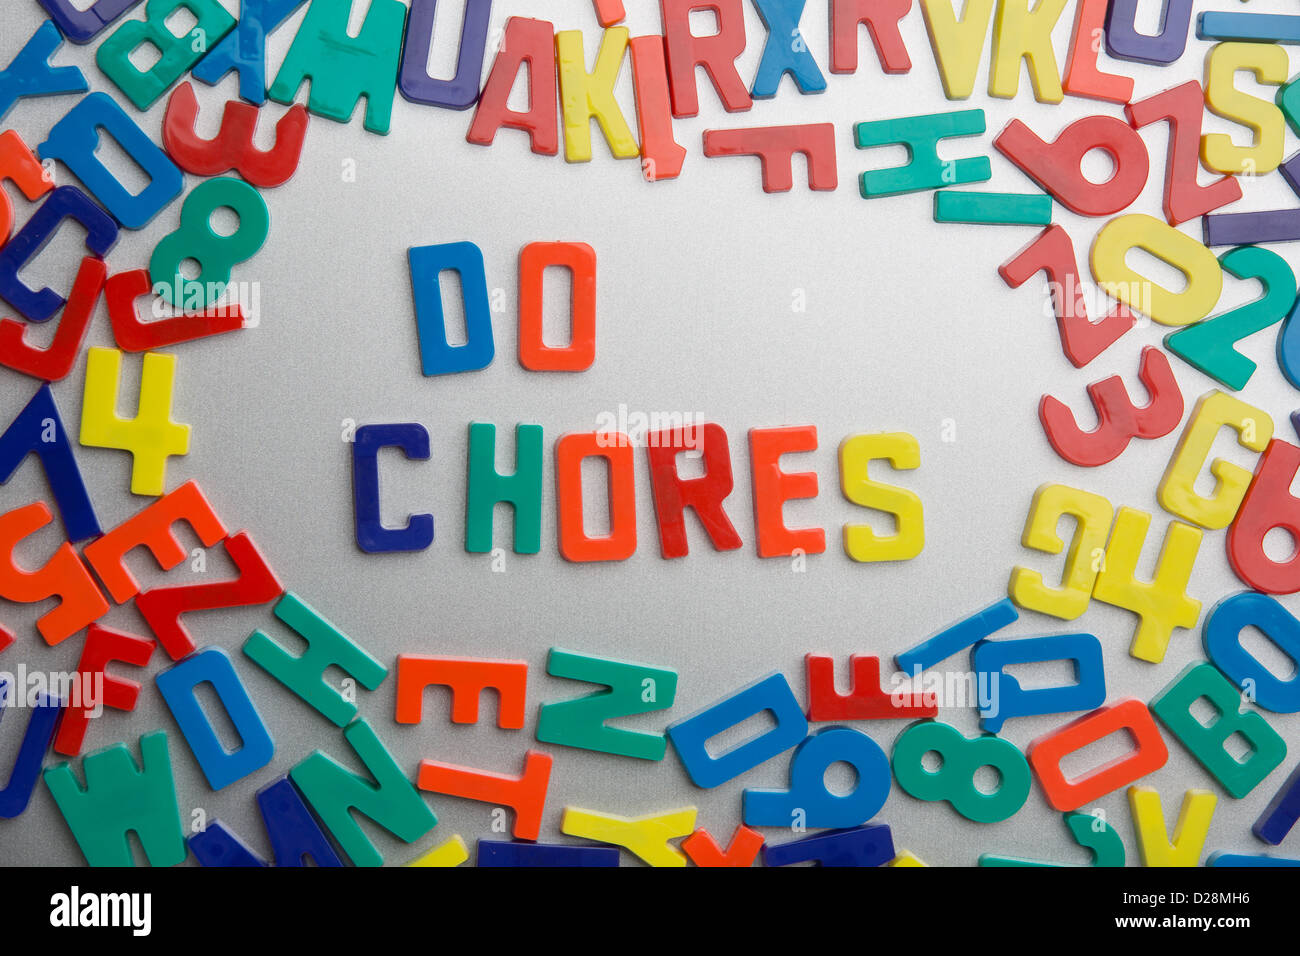 'Do Chores' - Refrigerator magnets spell messages out of a jumble of letters Stock Photo